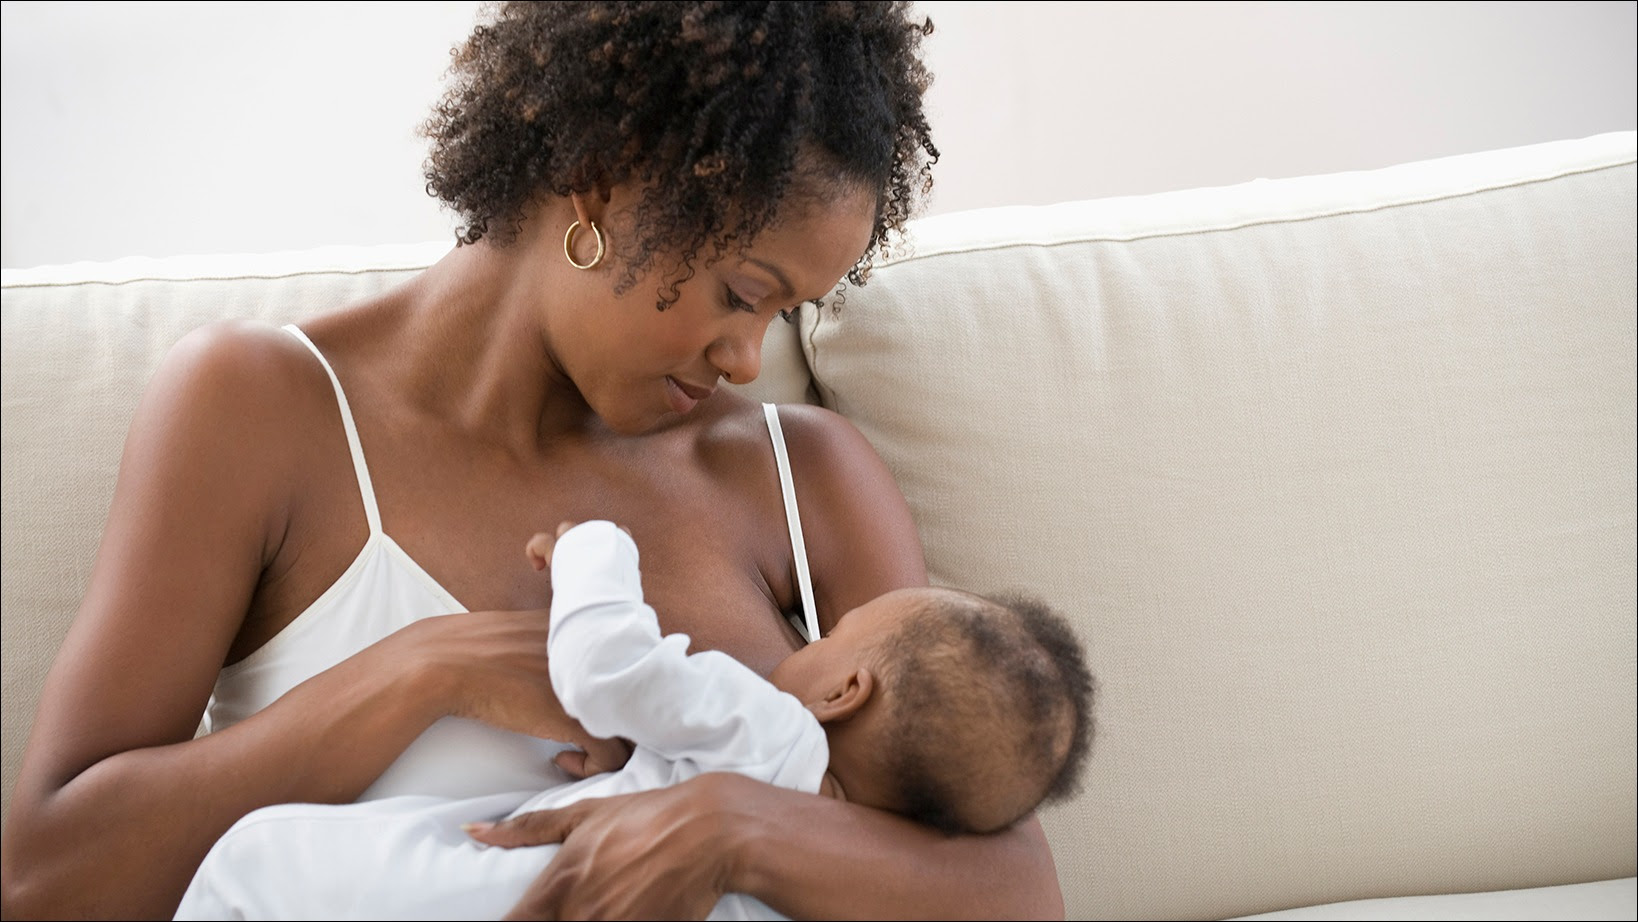 The figure shows an African American mother breastfeeding her baby.